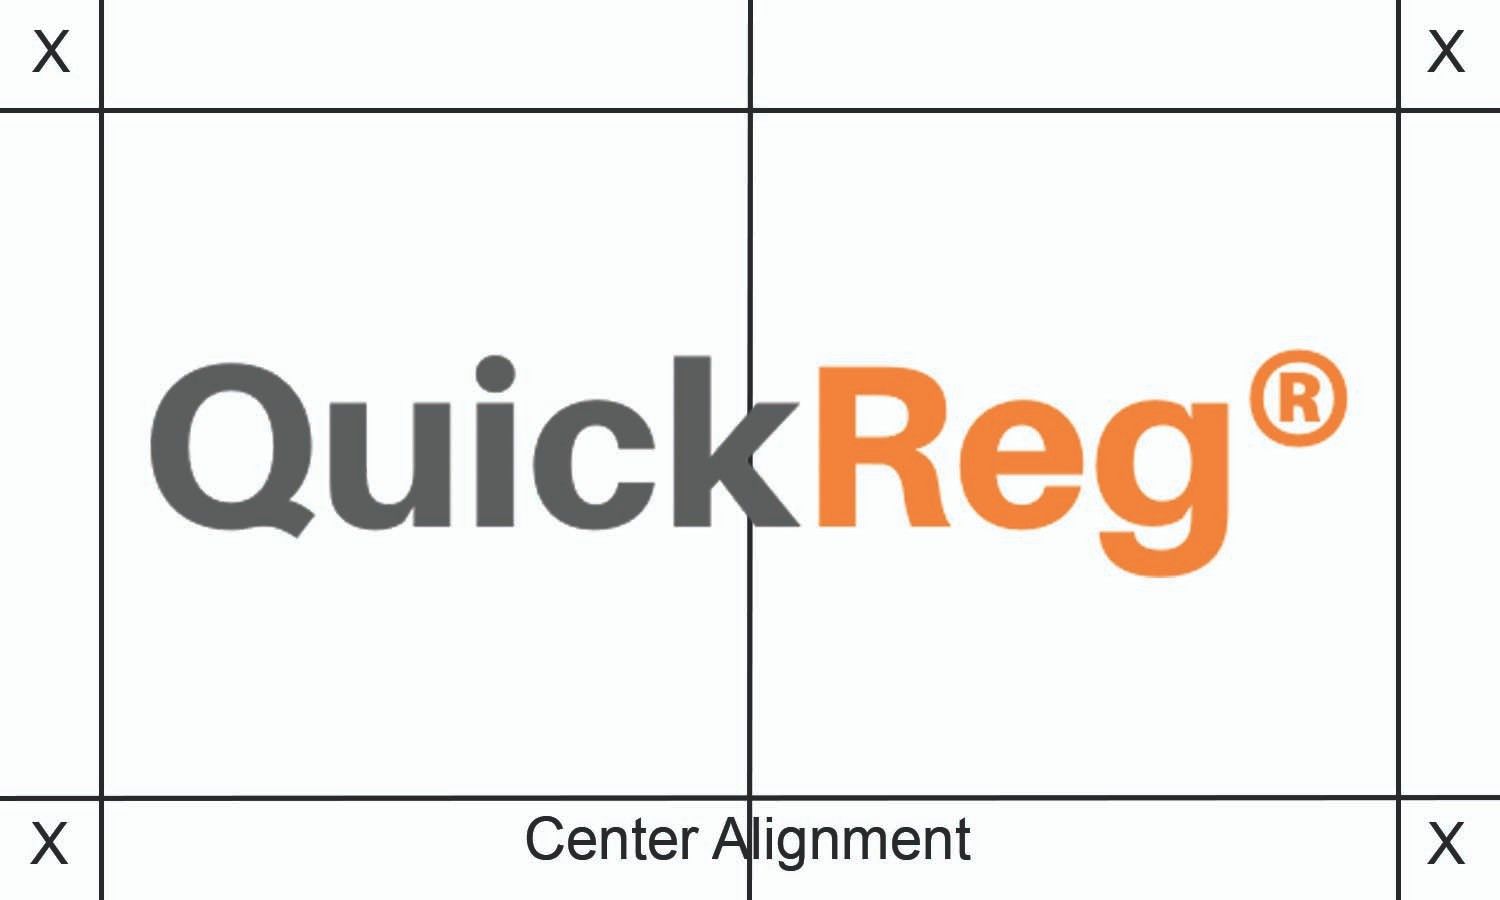 The full-color version of the QuickReg logo with guidelines showing the desired spacing between the logo and other elements